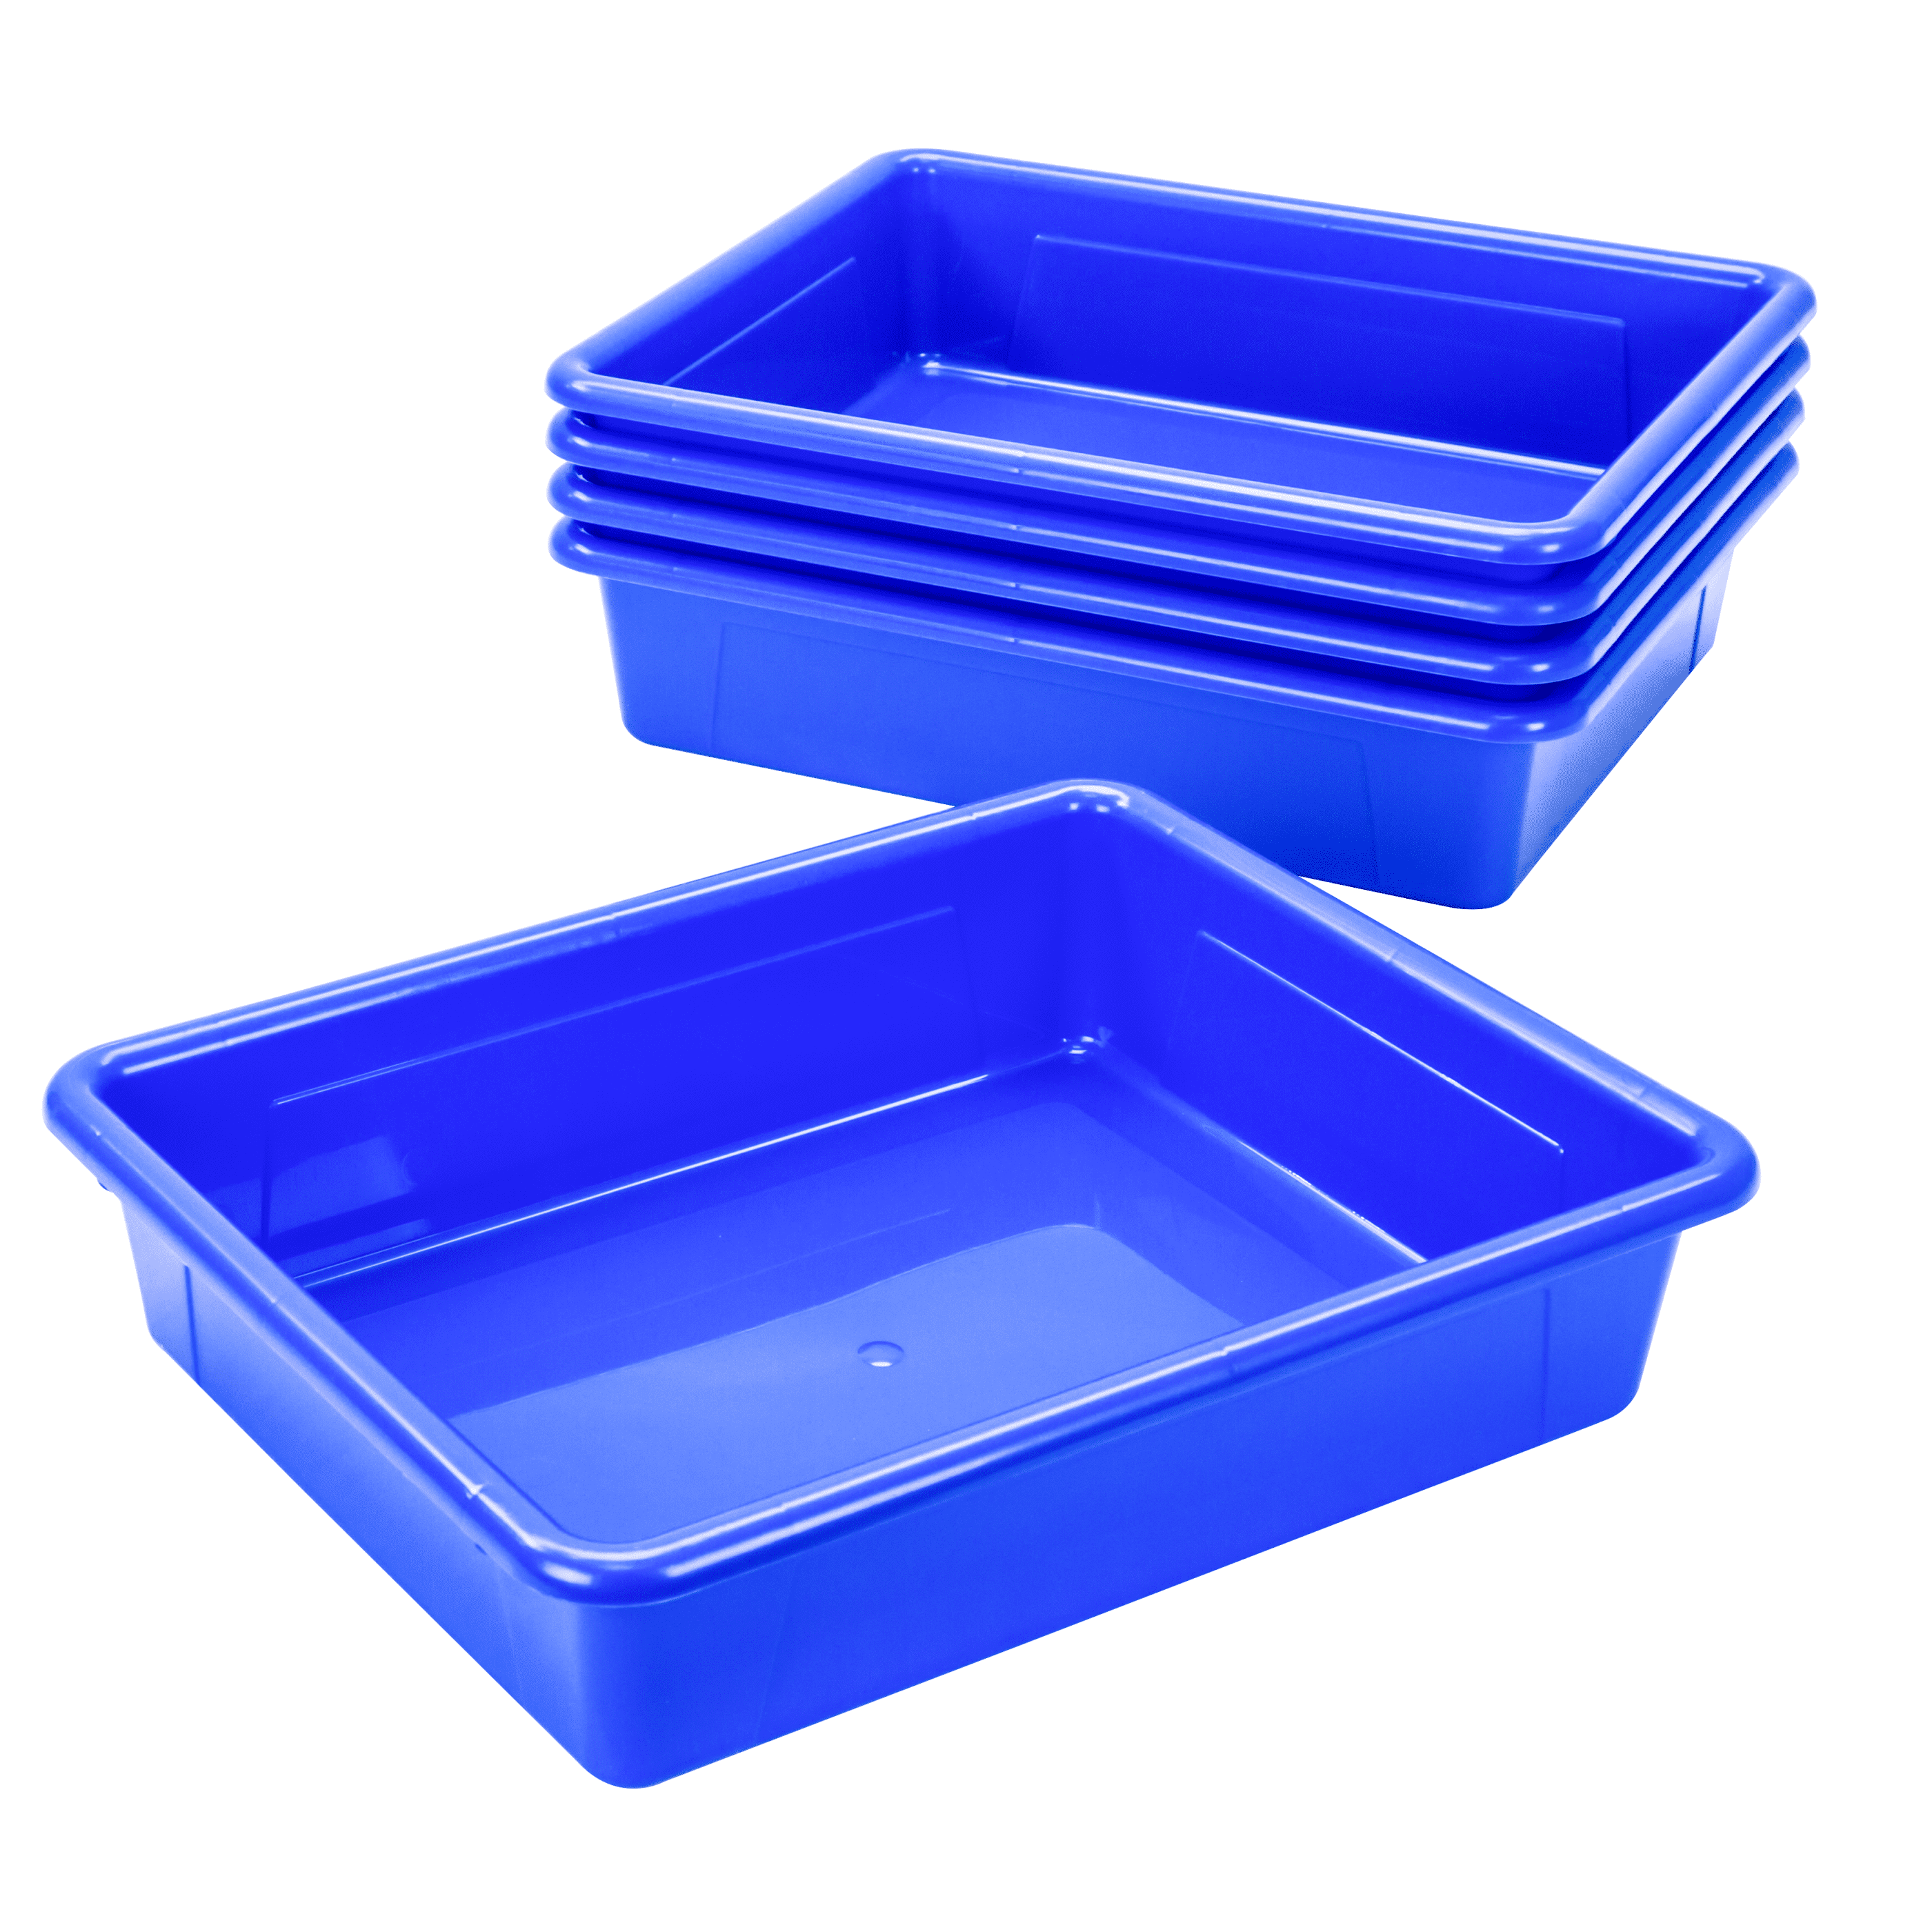 Storex Storage Tray, Letter size, 10 x 13 x 3 Inches, Blue